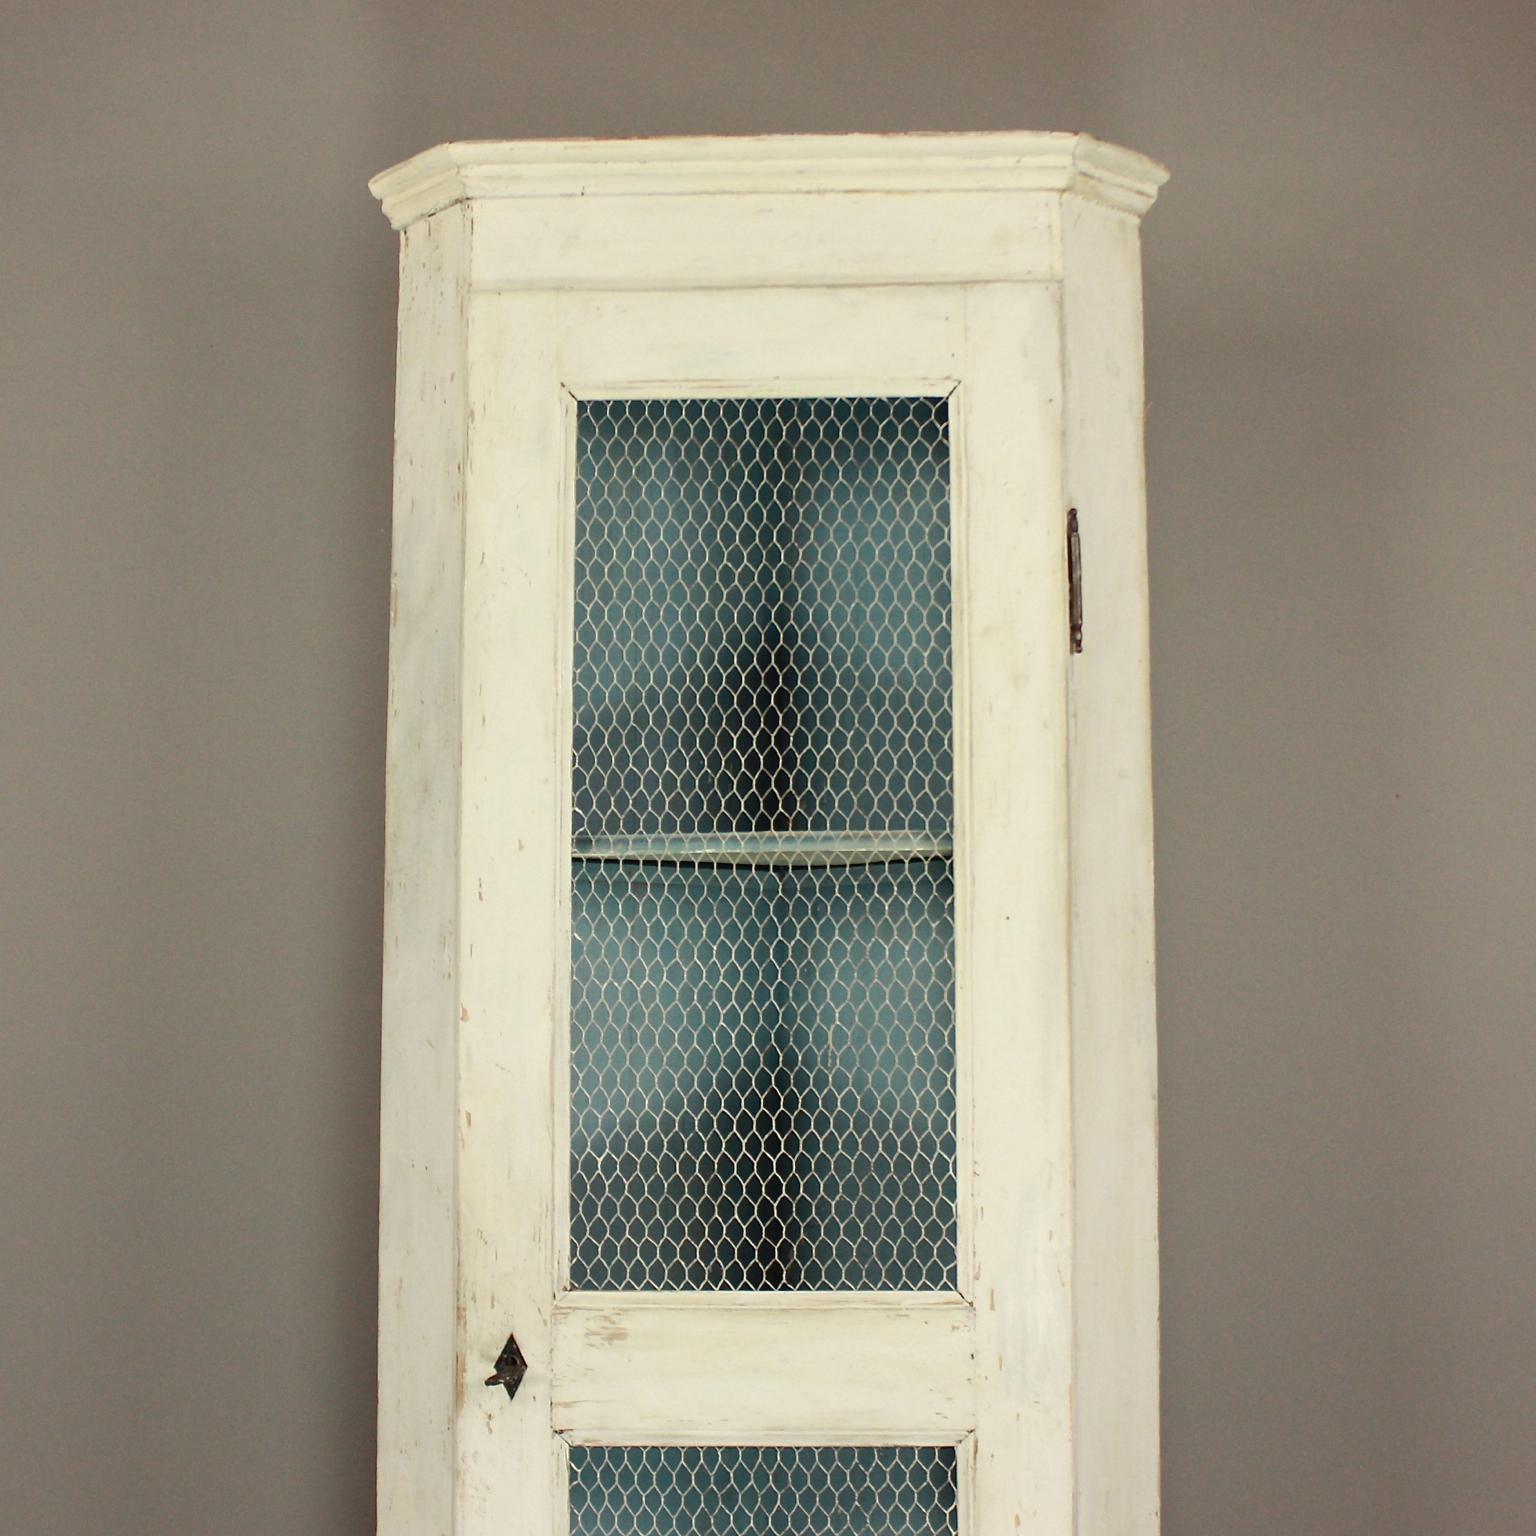 French Provençal 18th Century Louis XVI Grey Painted Corner Cupboard/Encoignure

A Provençal Louis XVI painted corner cabinet made of softwood and painted in greyish white and blue. Originating from the South of France and of plain construction with